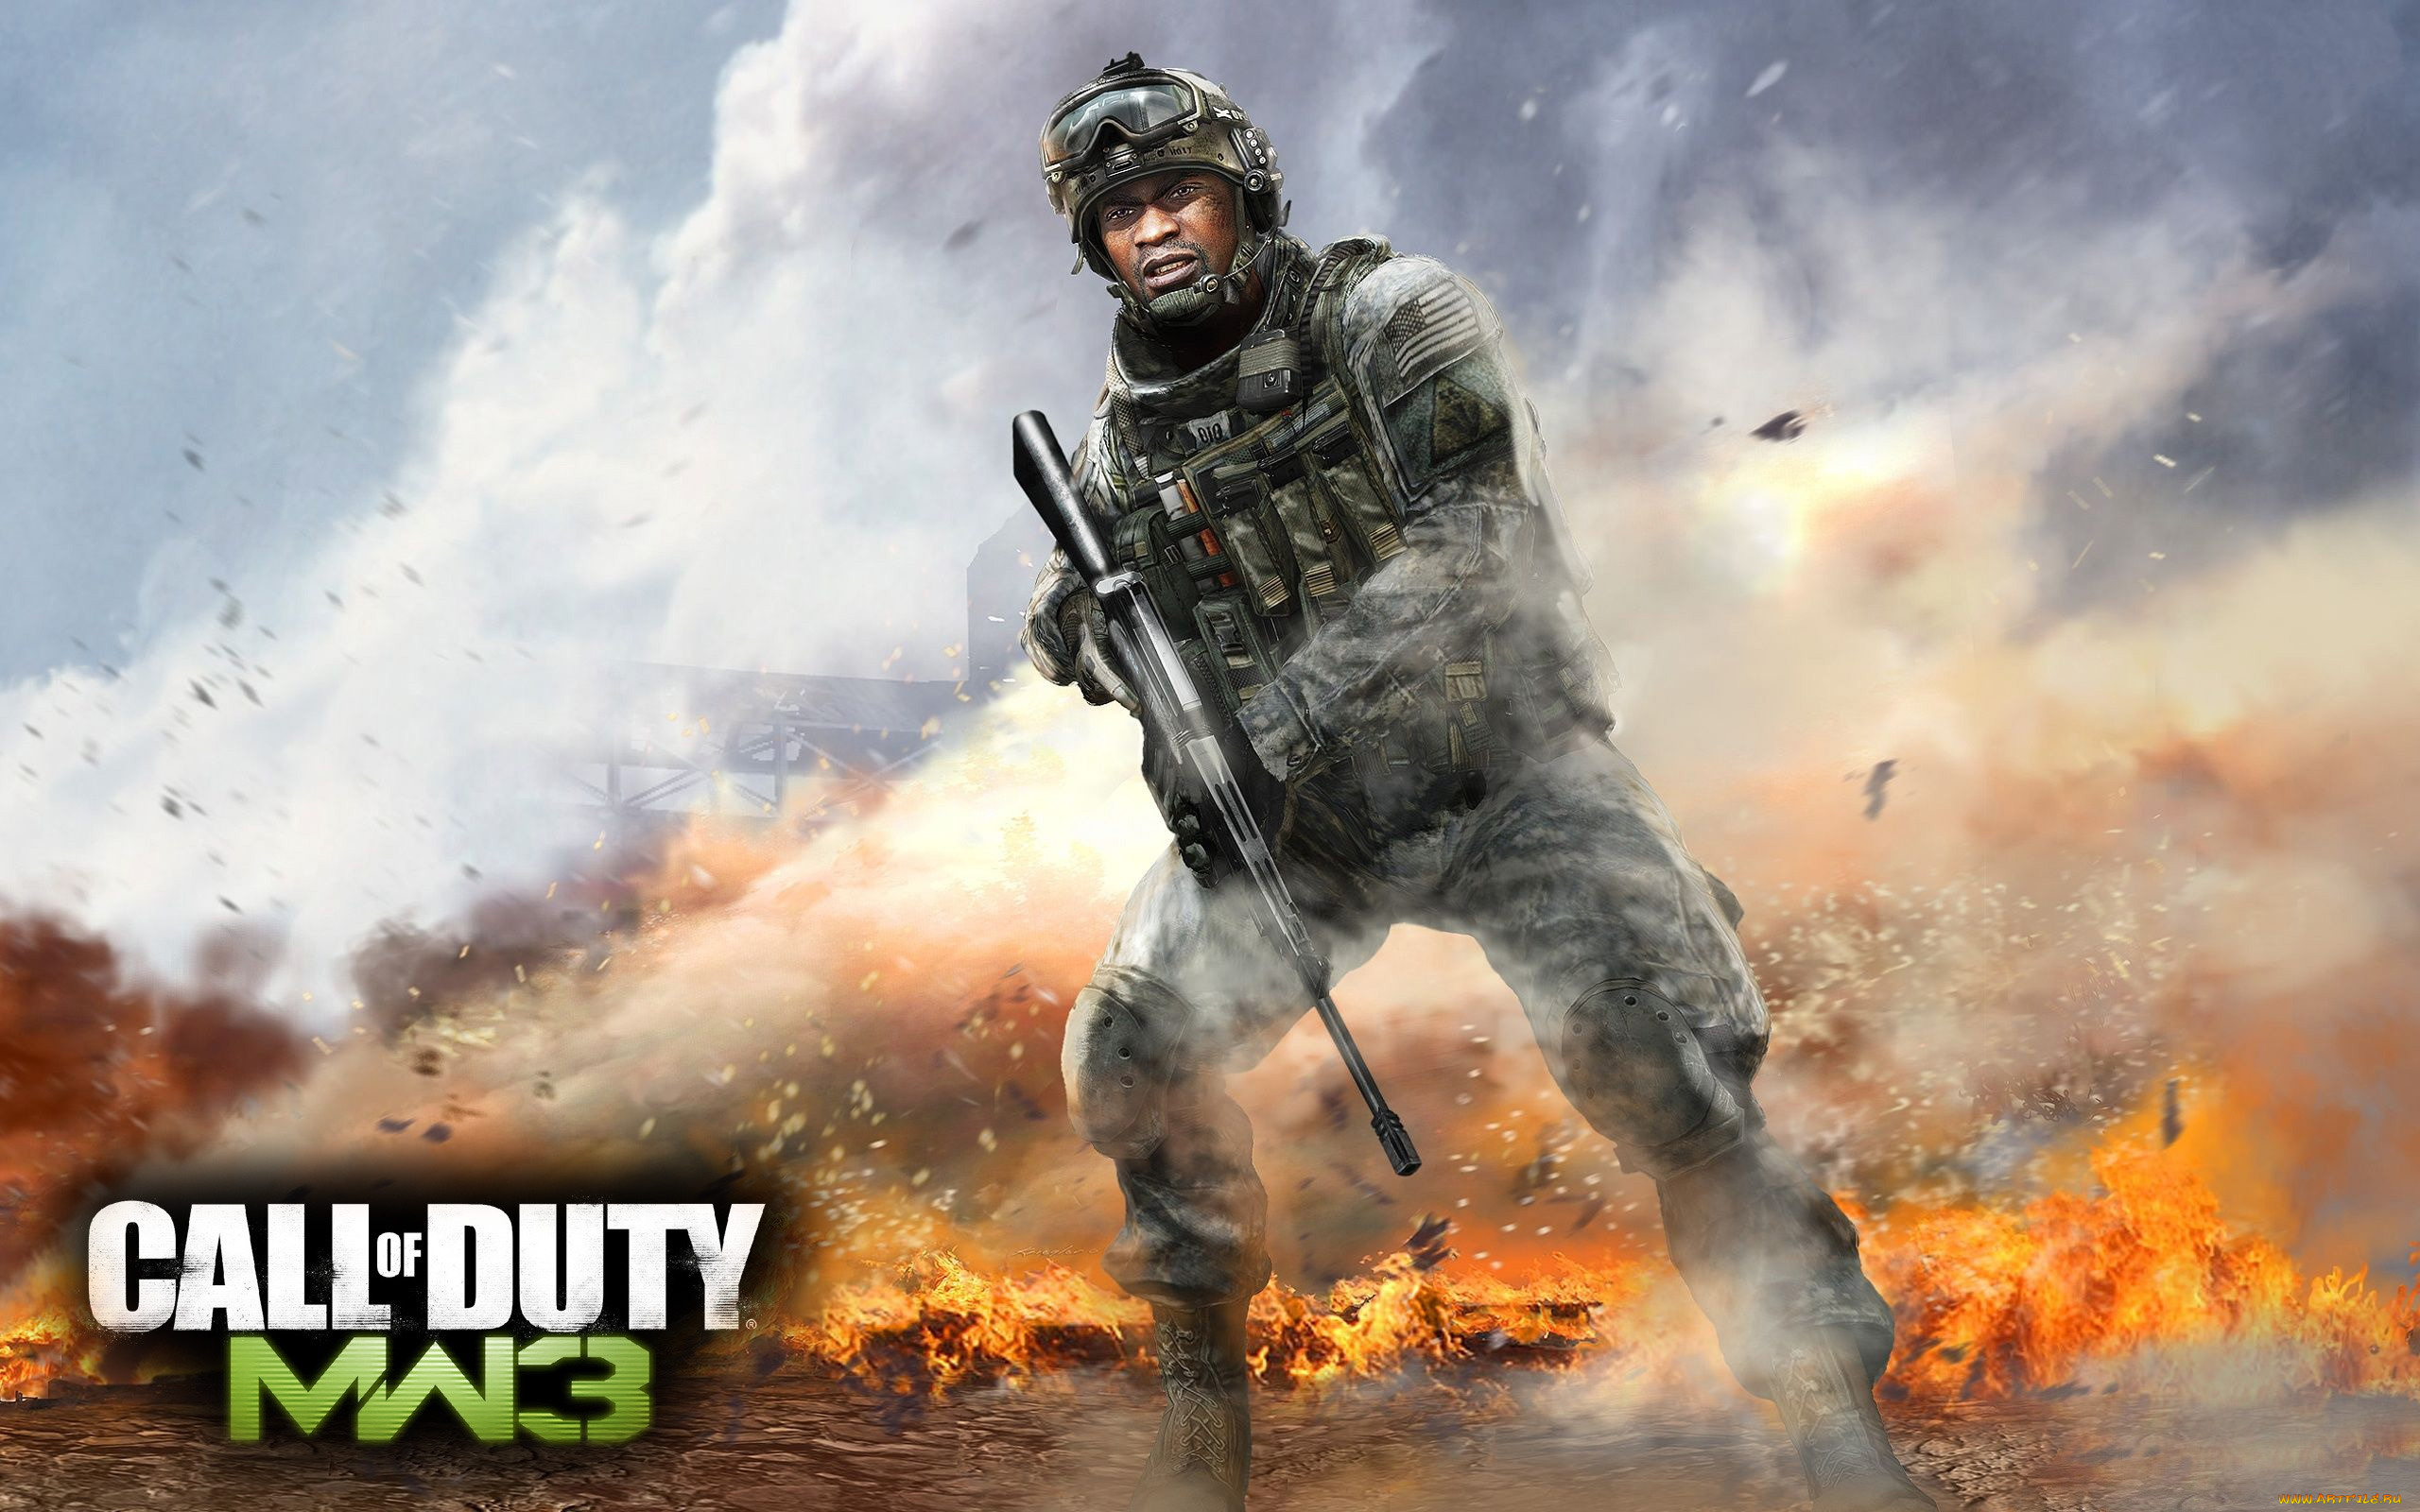 Call of duty warzone mobile на телефон. Modern Warfare 2. Call of Duty 4 Modern Warfare арт. Call of Duty Modern Warfare 2 арт.